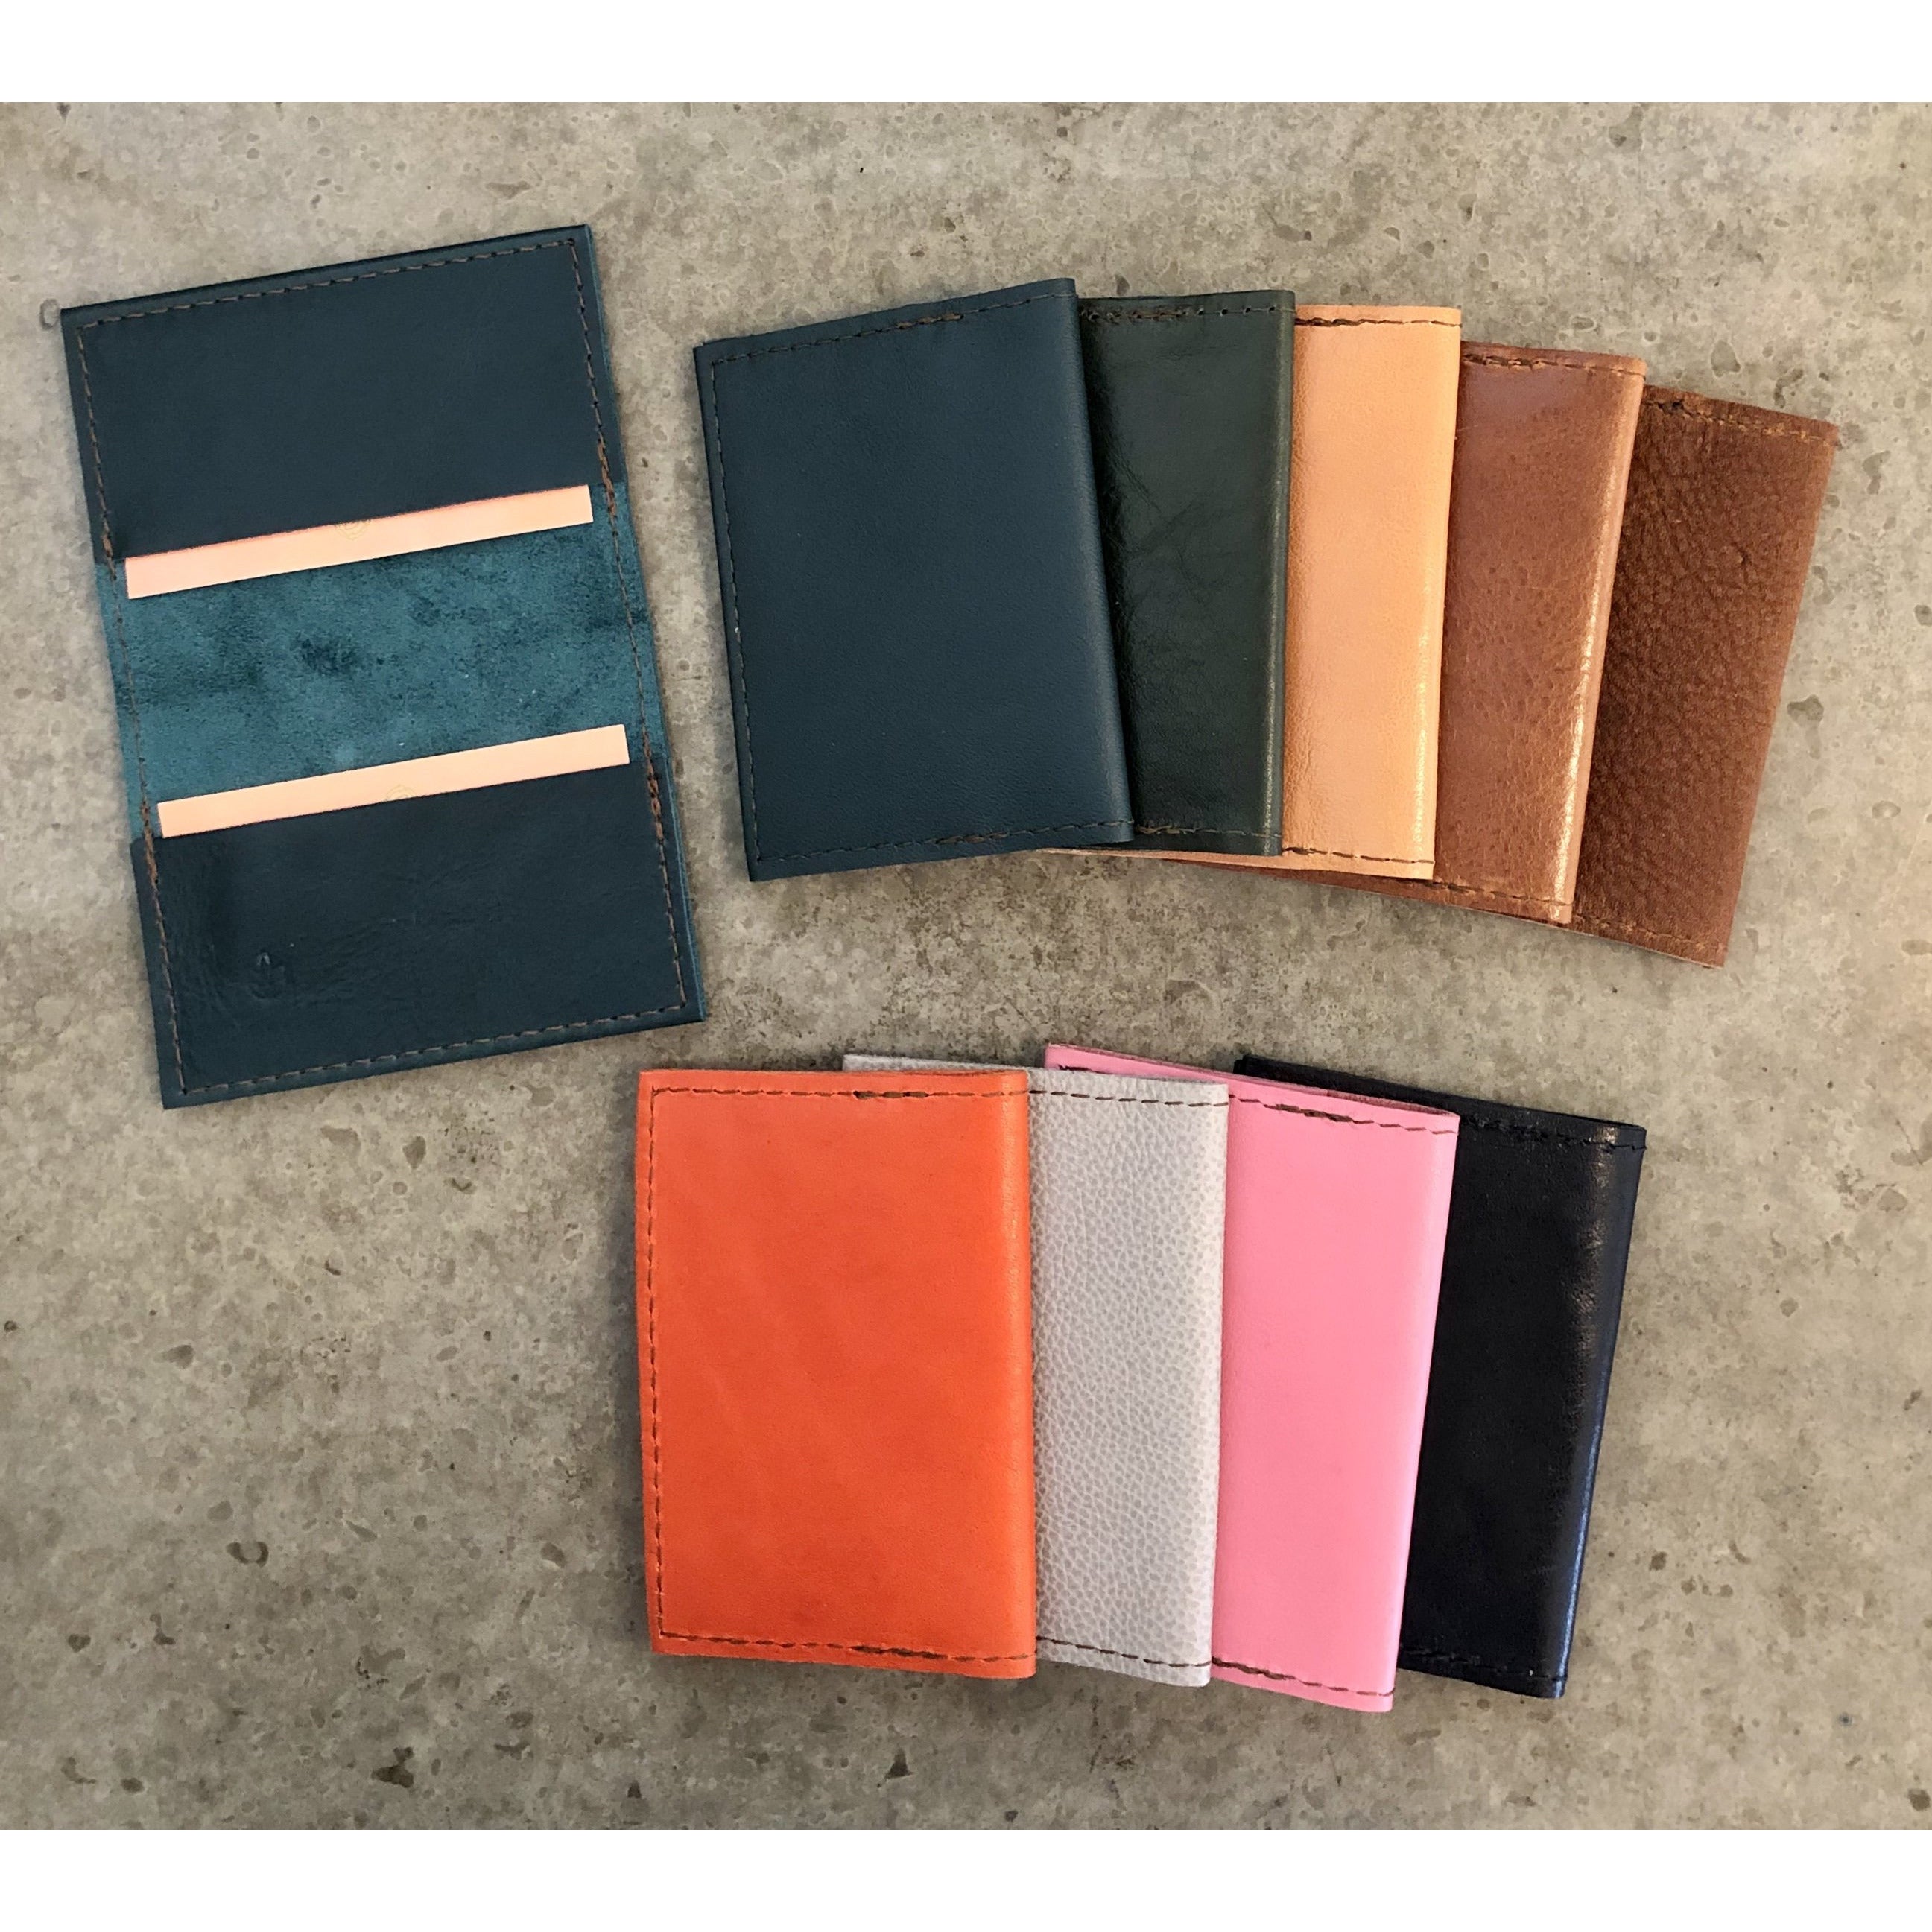 Leather Slimfold Wallets, current color offerings: Shiny Teal, Teal, Forest Green, Light Tan, Brown, Suede Brown, Bright Orange, Spotted Off White, Bubblegum Pink, and Black